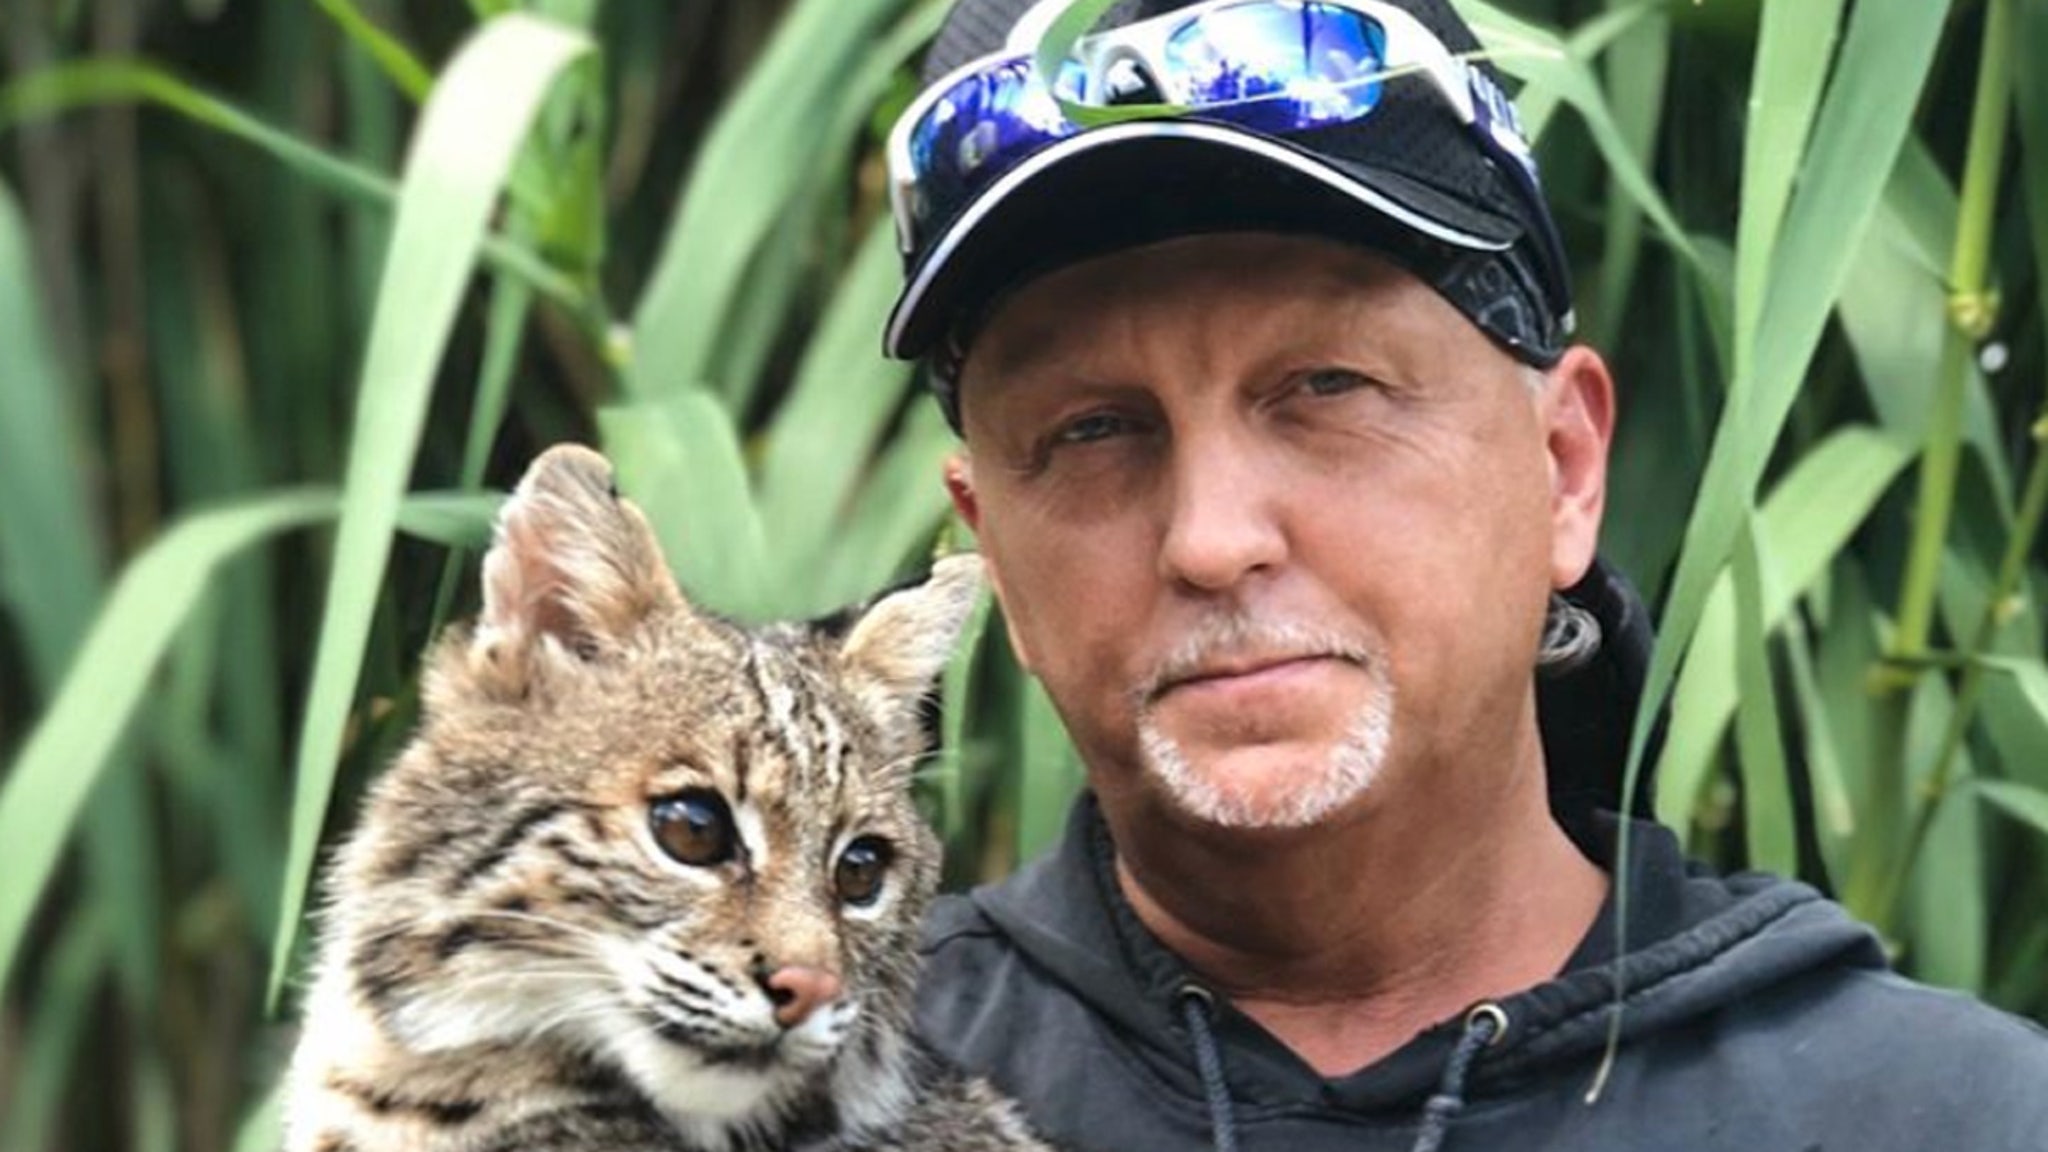 ‘Tiger King’ star Jeff Lowe suffers a stroke and suspects he was poisoned